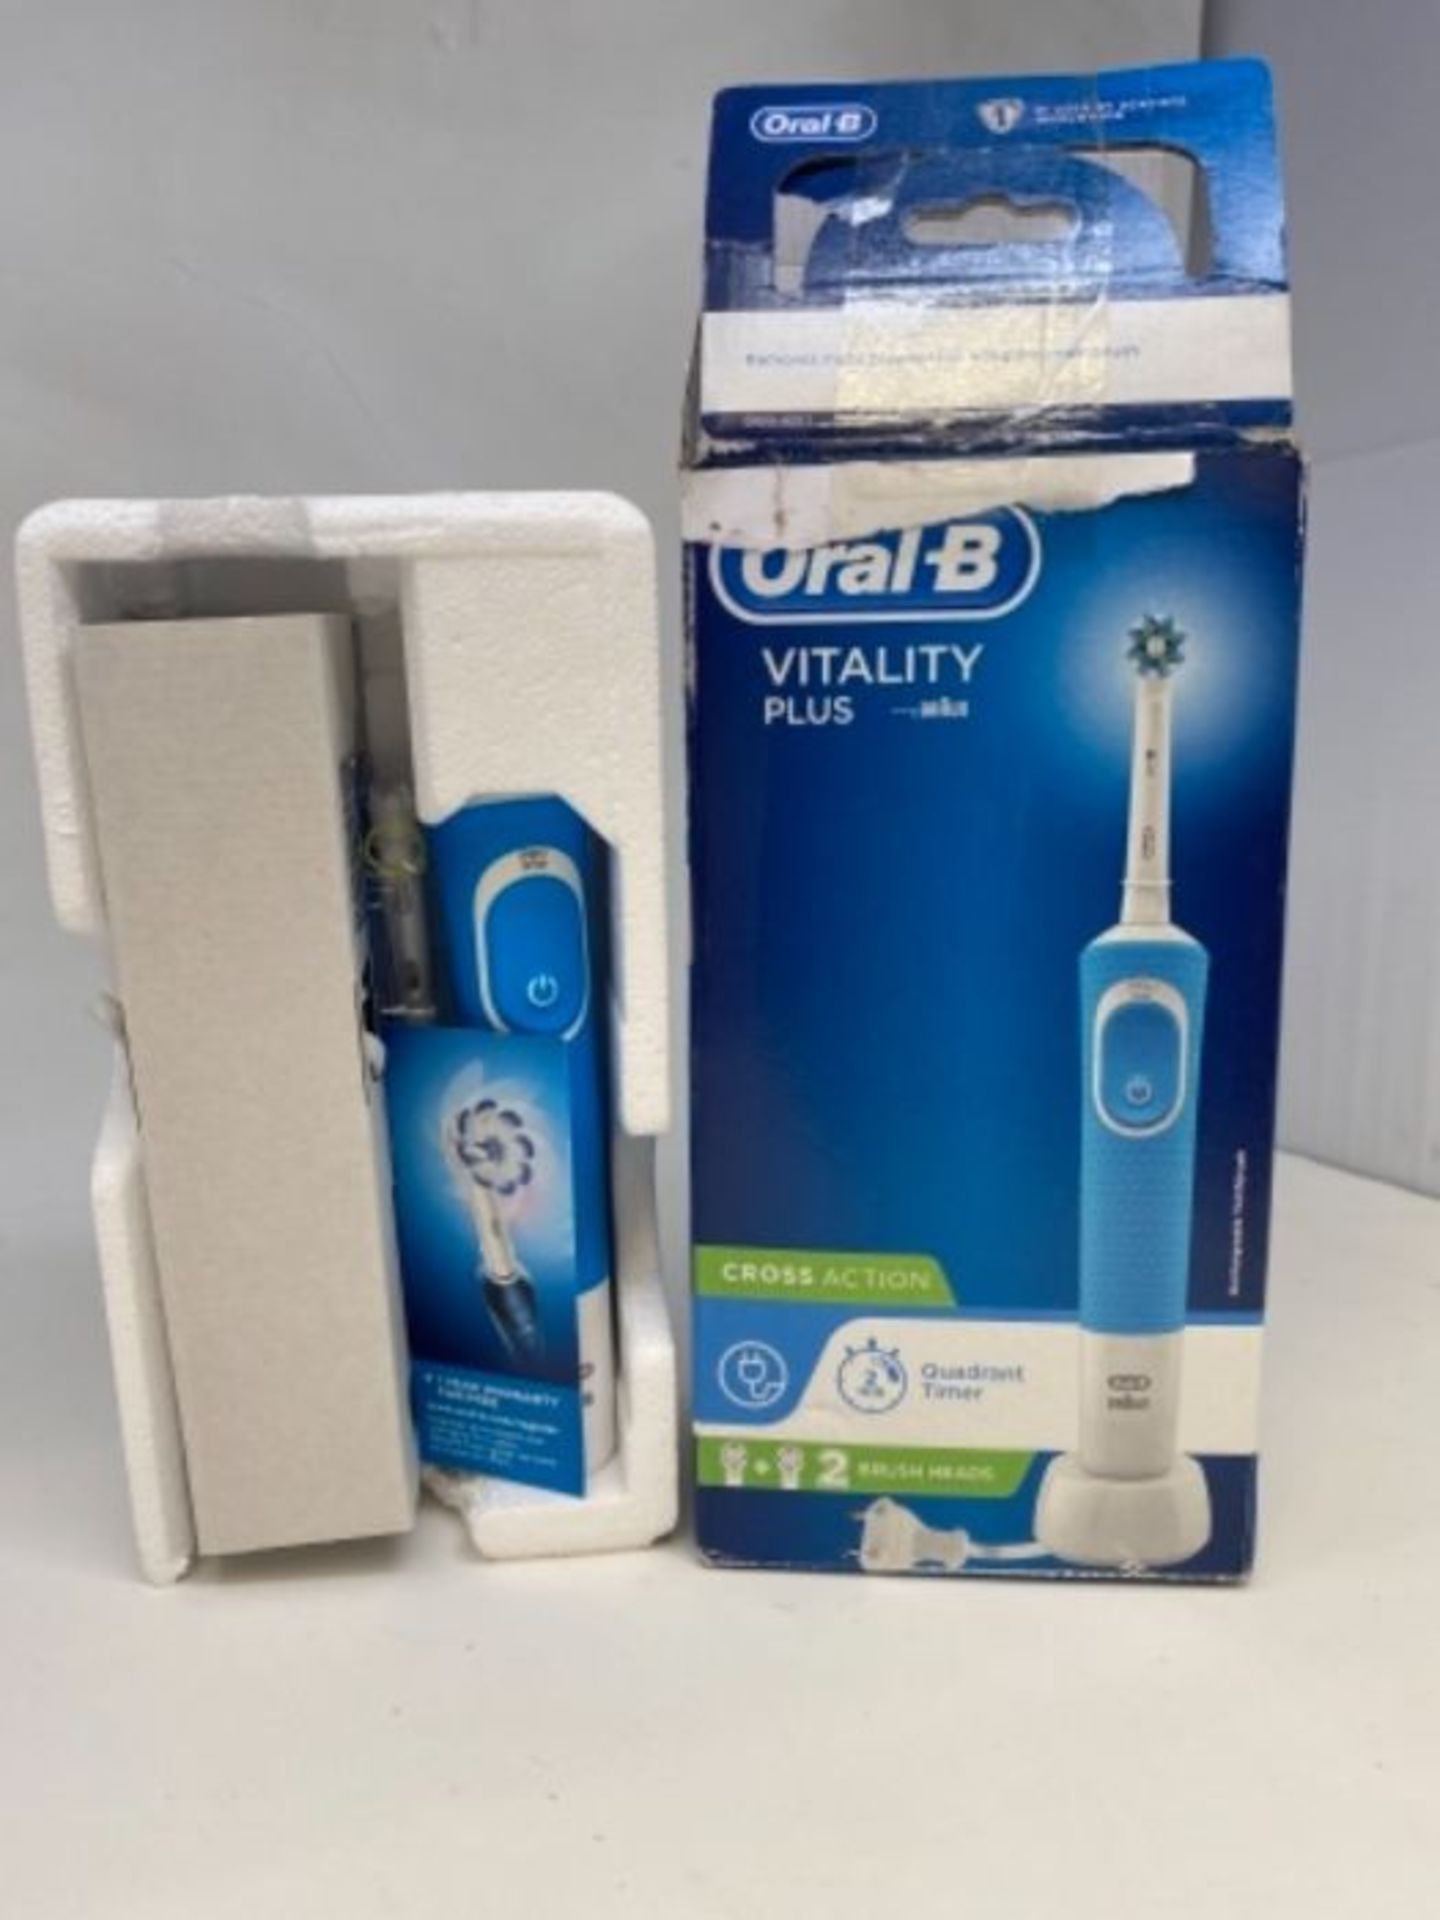 Oral-B Vitality Plus CrossAction Electric Rechargeable Toothbrush, 1 Blue Handle, 2 Br - Image 2 of 2